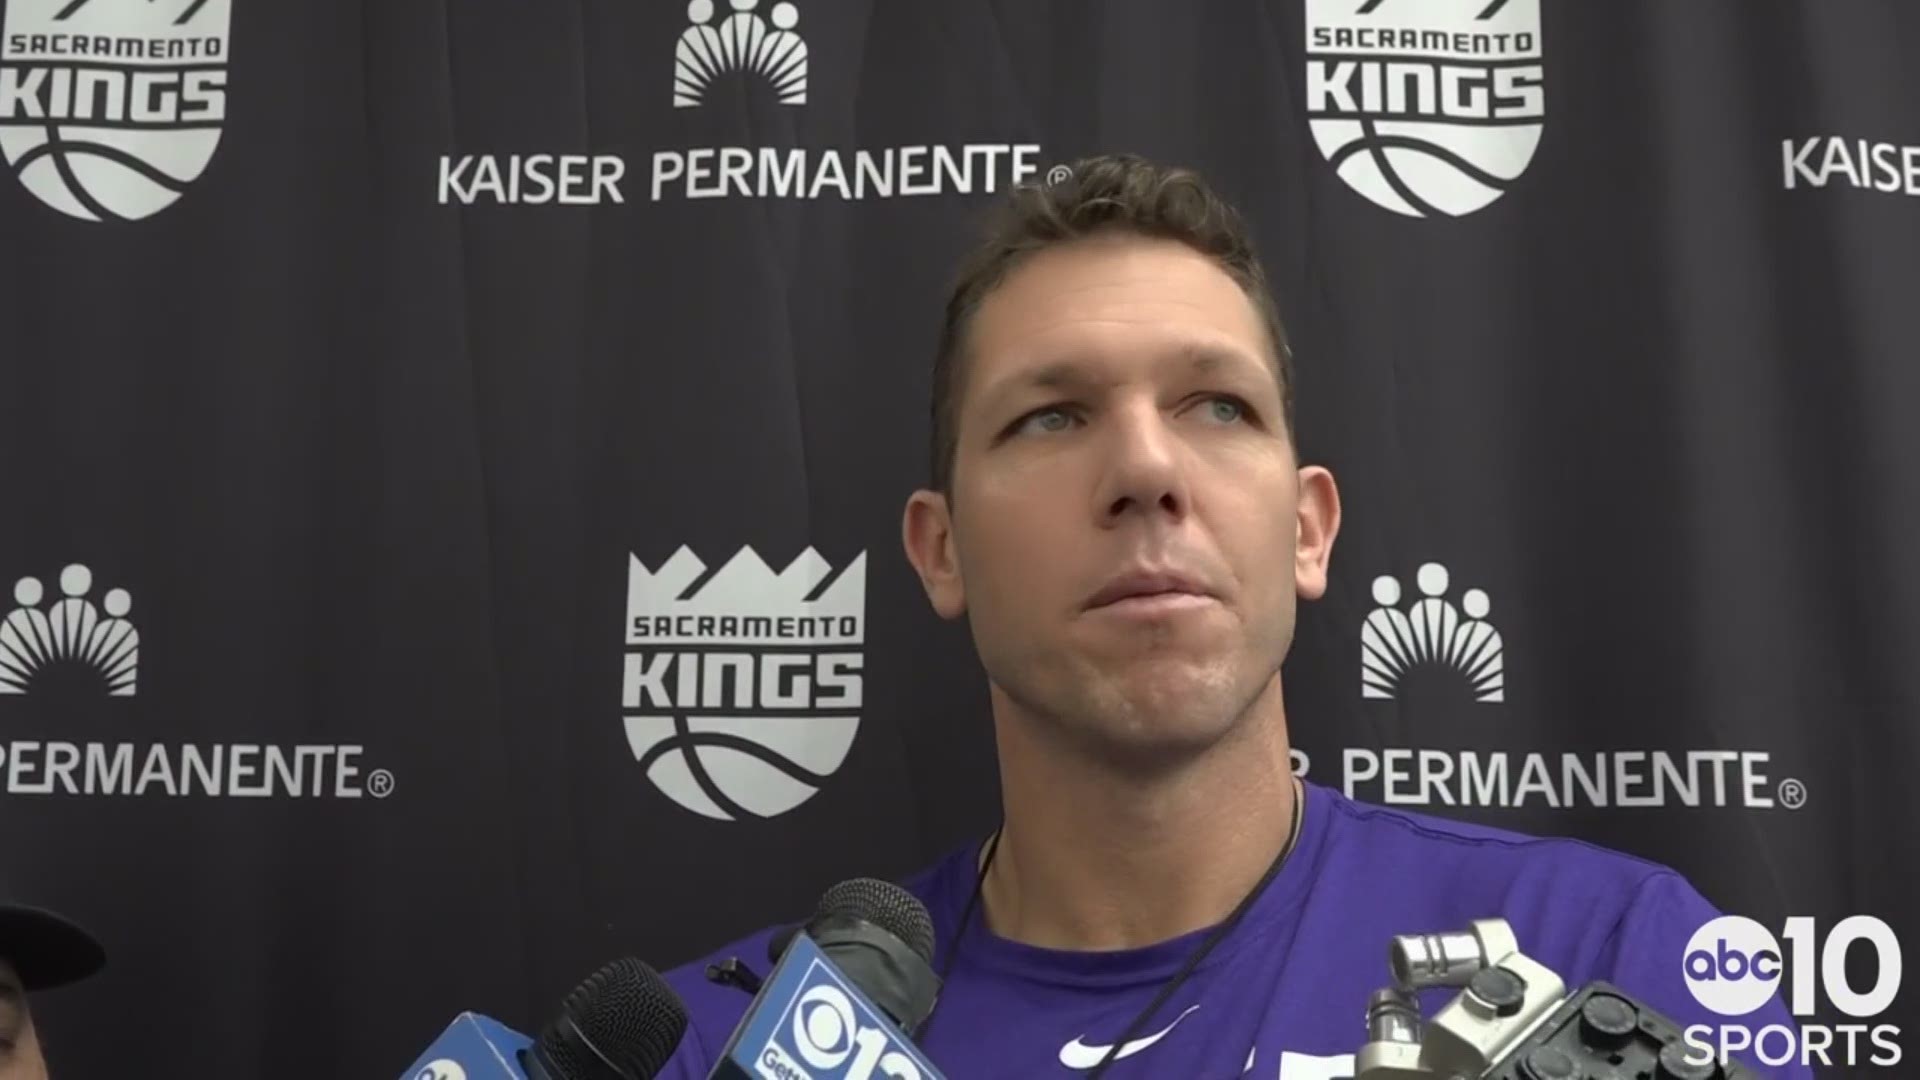 Kings coach Luke Walton talks about making his first return to Los Angeles to face the Lakers for the first time since he parted ways with the organization.